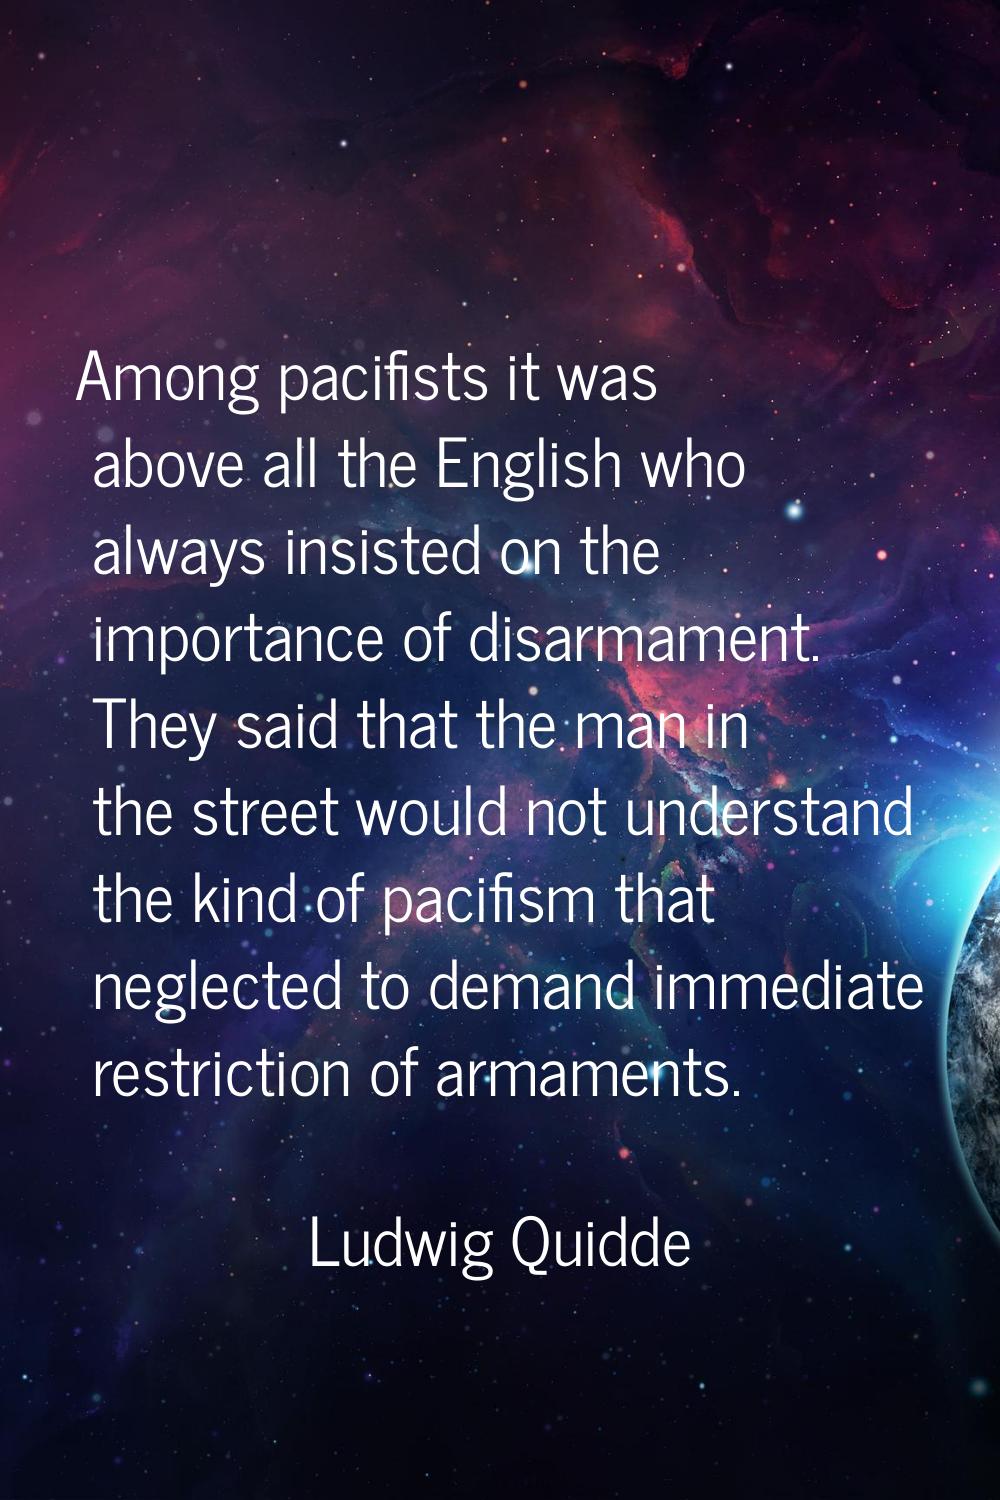 Among pacifists it was above all the English who always insisted on the importance of disarmament. 